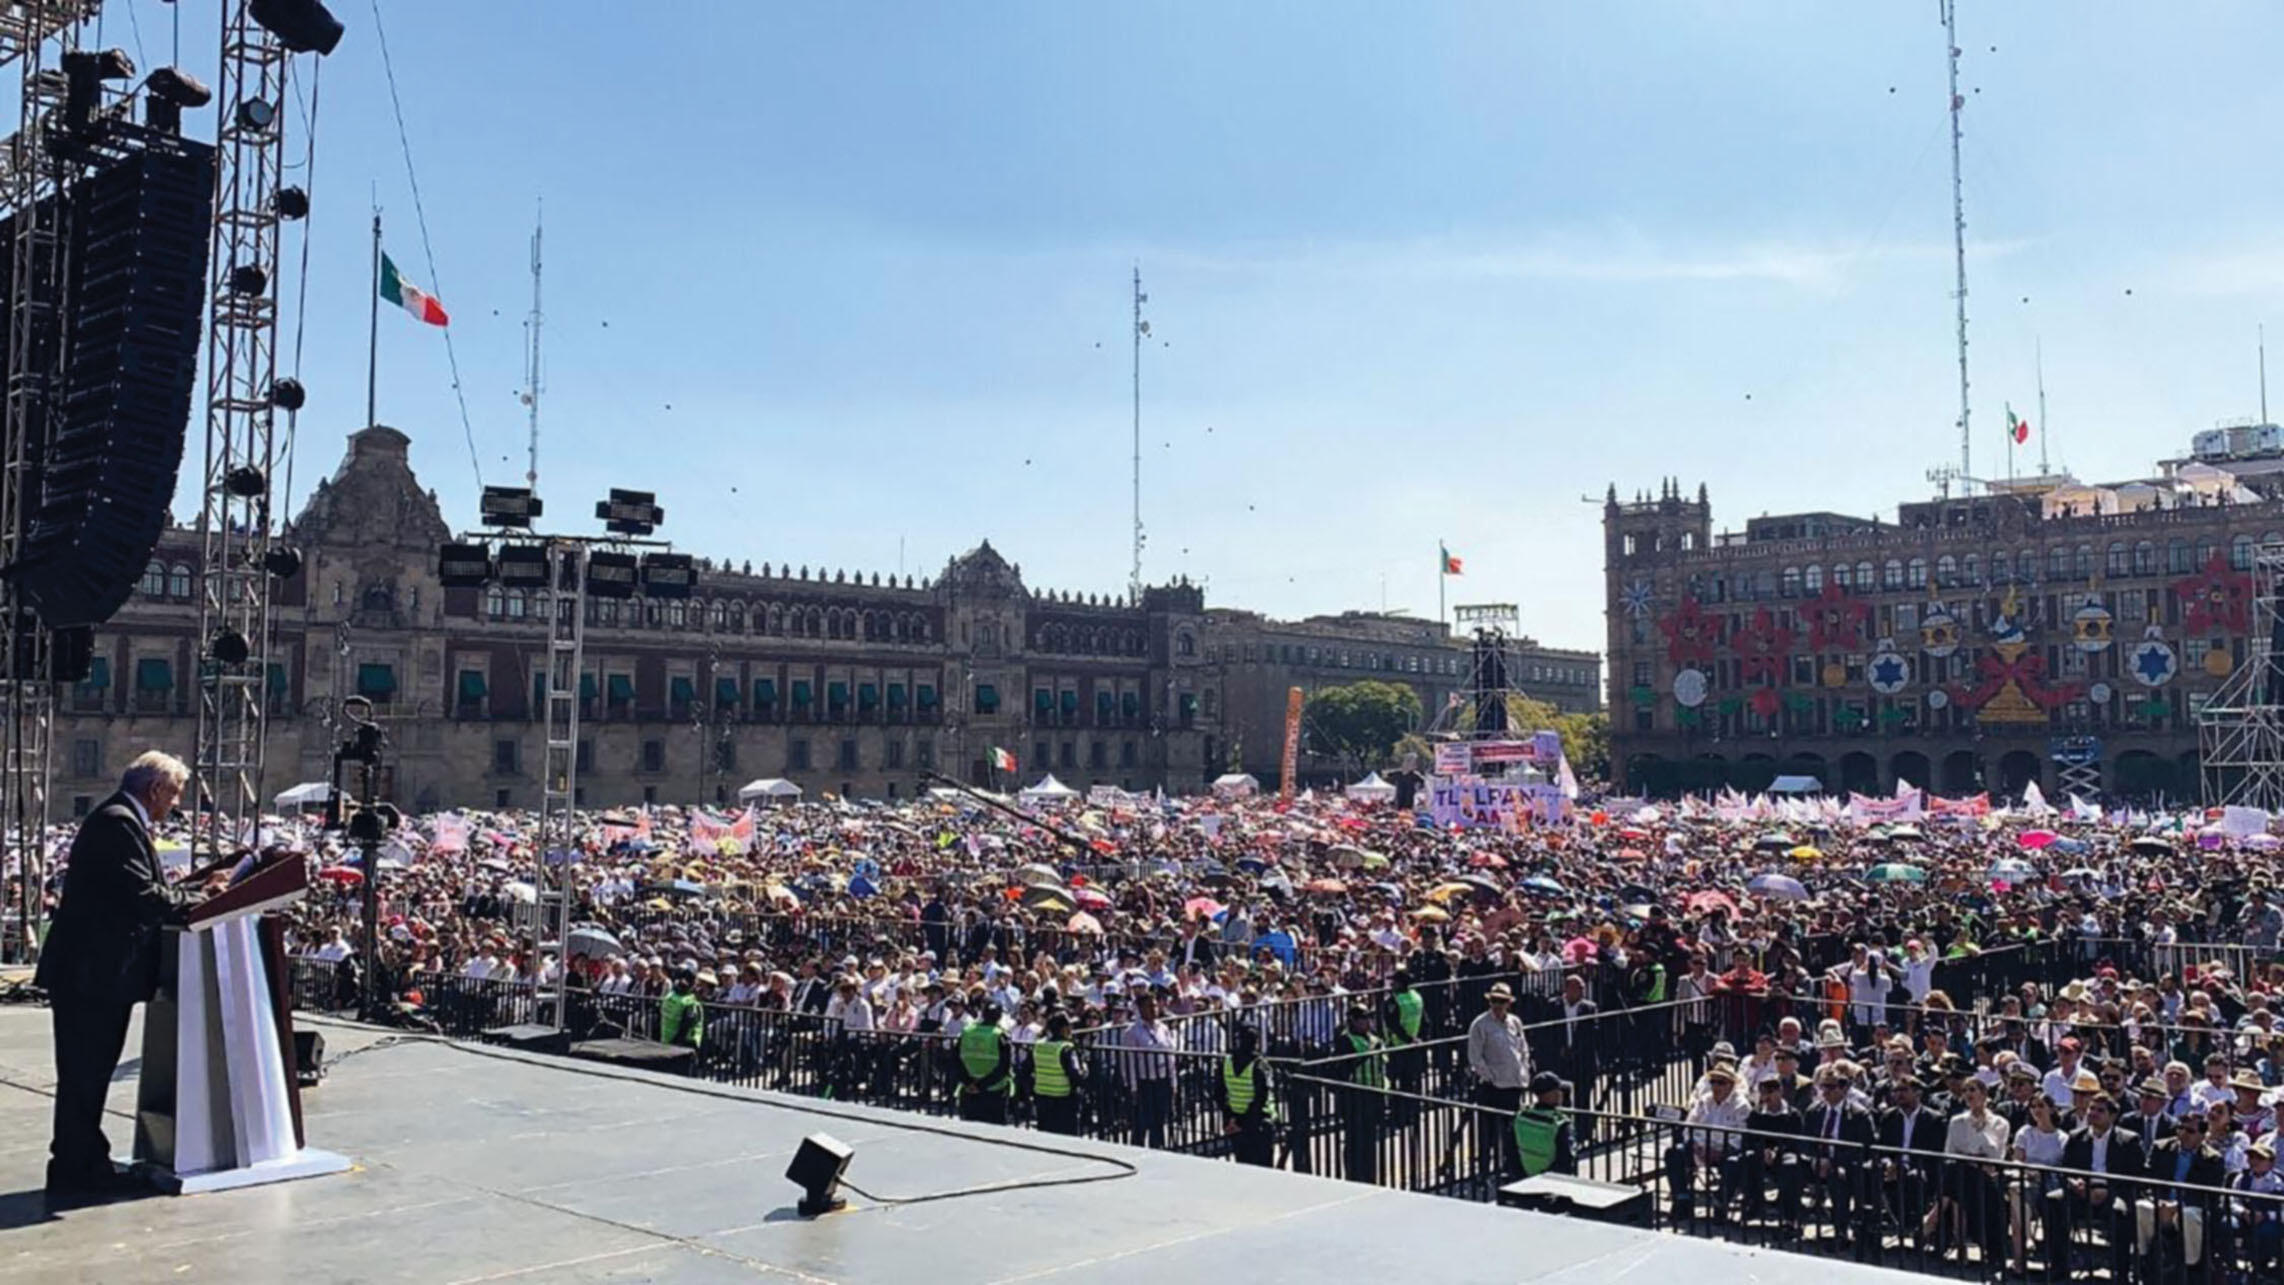 The government celebrated López Obrador’s first year in office with a day-long anniversary party in Mexico City, December 2019. (Photo courtesy of the Presidencia de la República Mexicana.)